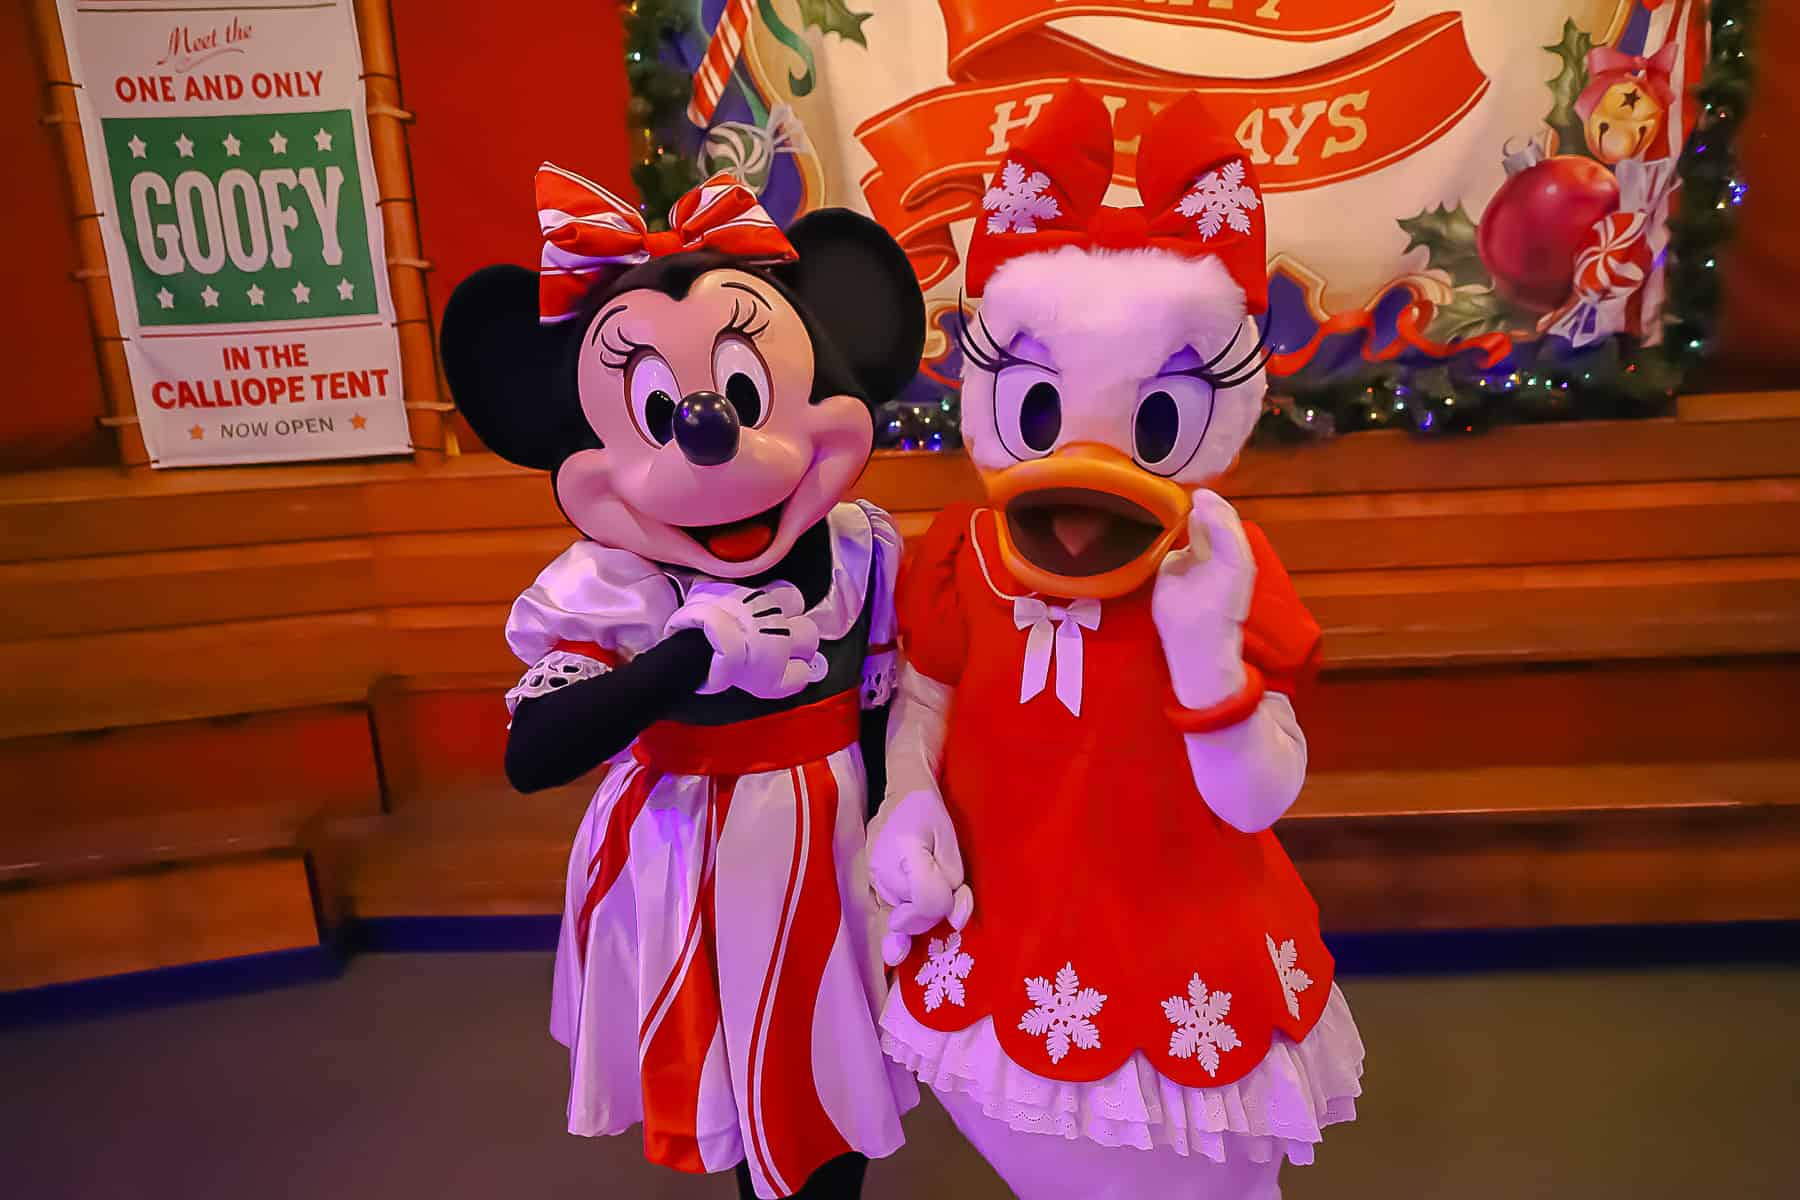 Minnie Mouse in a candy cane striped dress and Daisy in a red dress with snow flakes. 